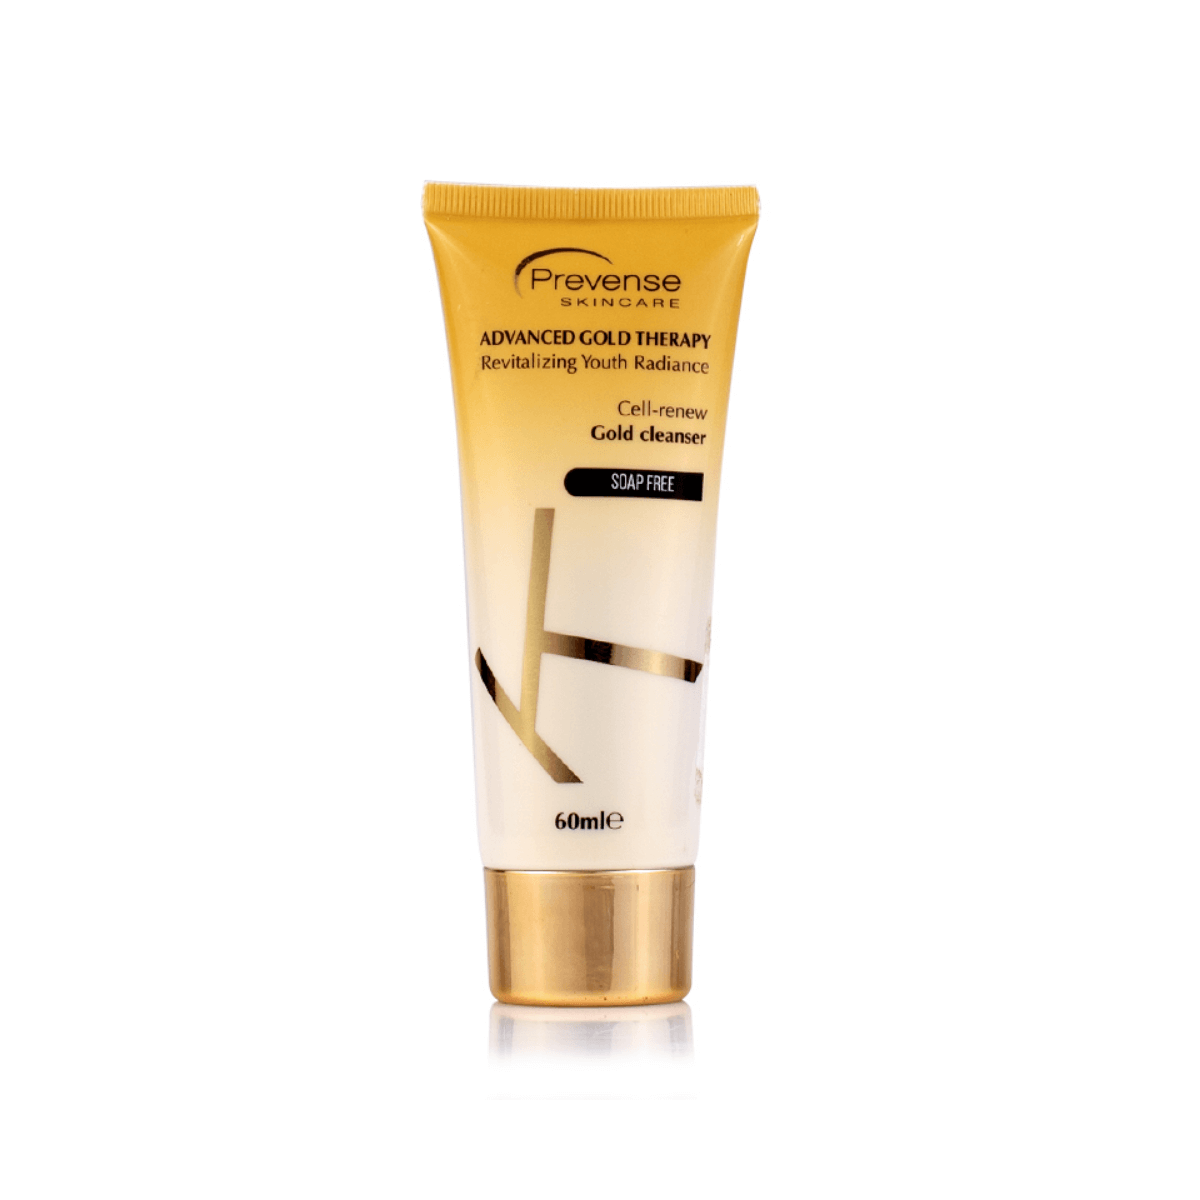 CELL-RENEW GOLD CLEANSER 60ML